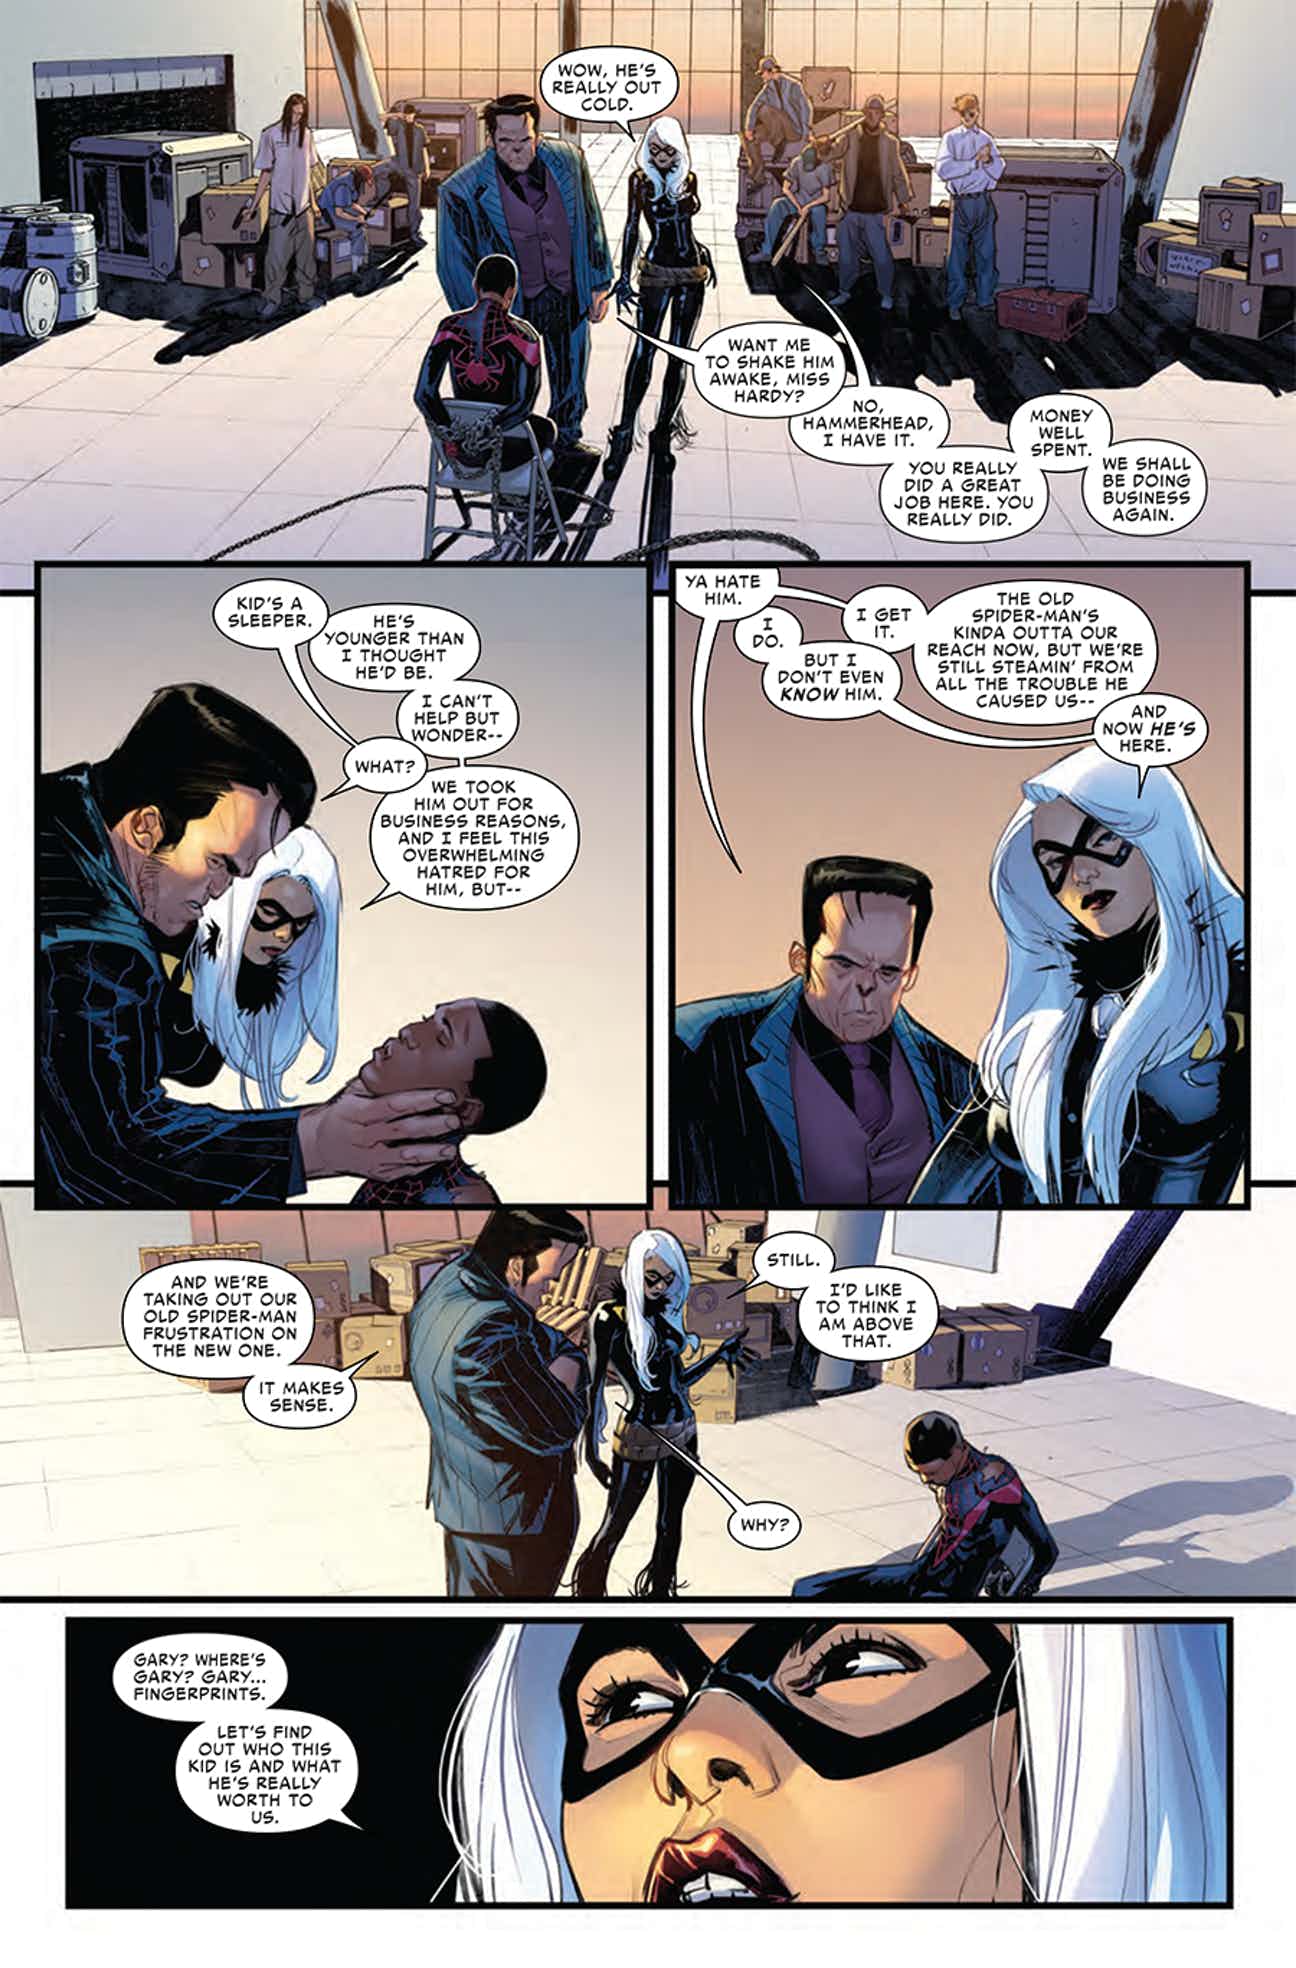 Miles is unmasked by Hammerhead and The Black Cat - Spider-Man: Miles Morales Vol. 1